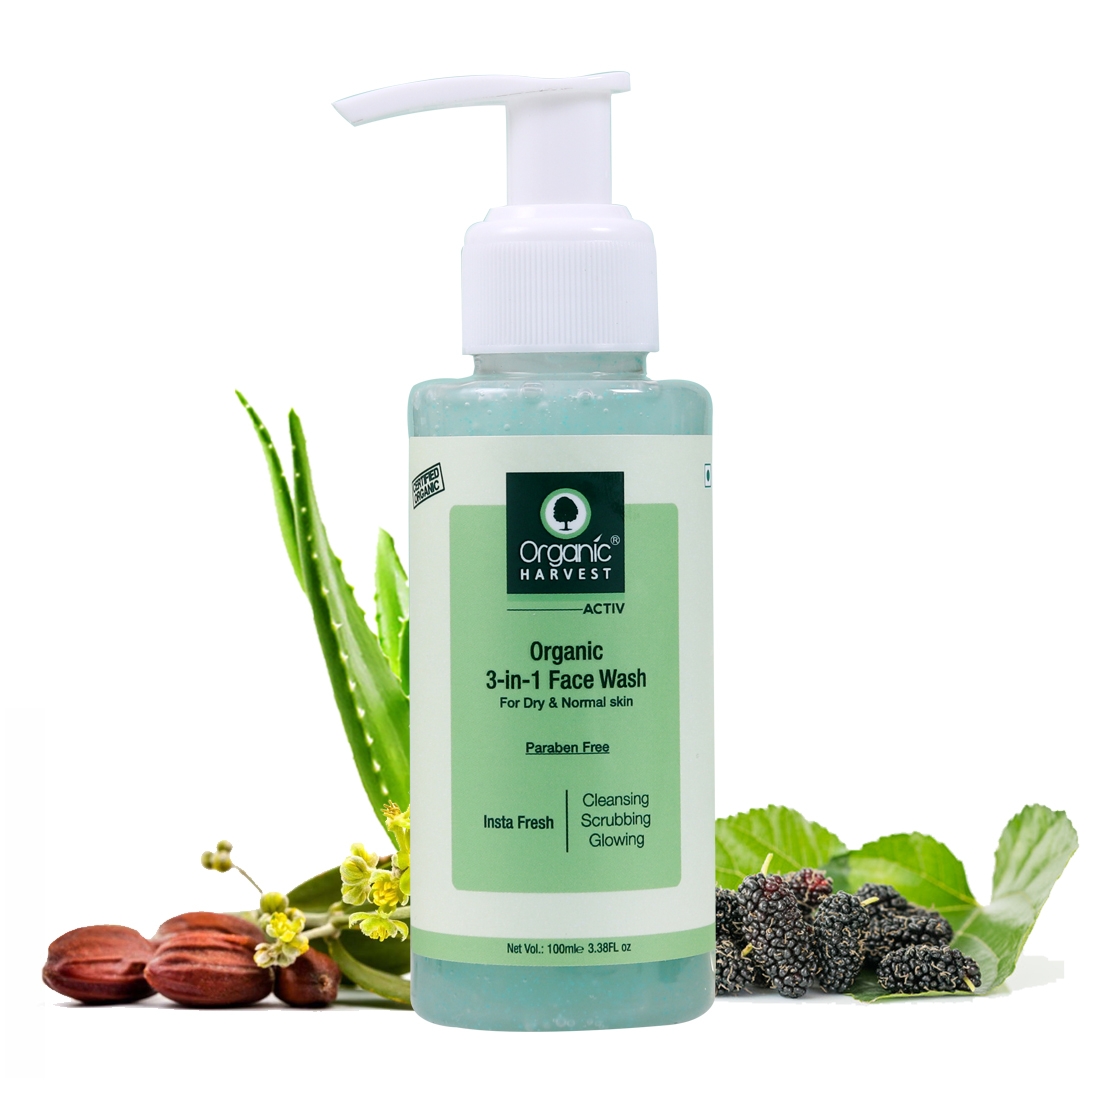 Organic Harvest | Organic Harvest 3-in-1 Face Wash for Dry and Normal Skin, 100 ml, Ideal for Cleansing, Scrubbing, and Glowing Skin, 100% Organic, Sulphate and Paraben Free